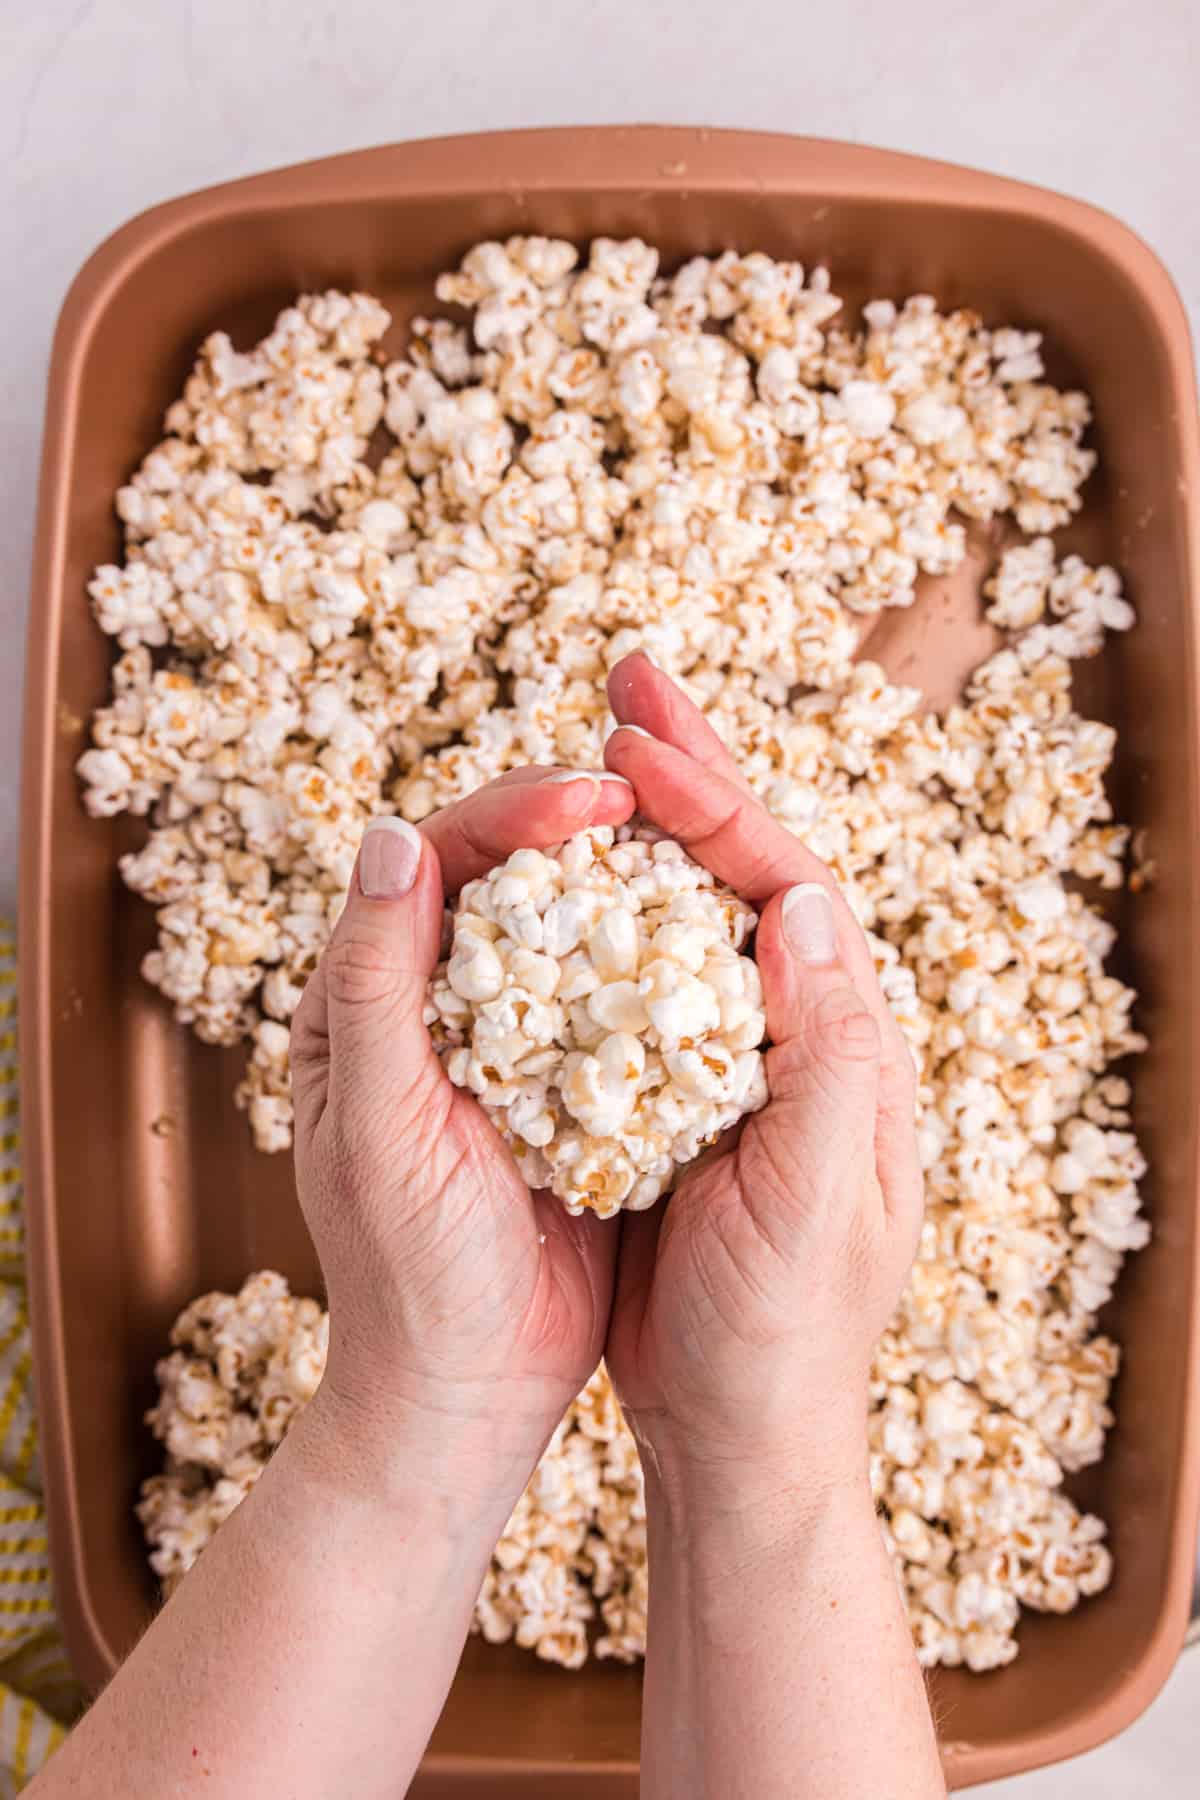 A popcorn ball is being formed by two hands.